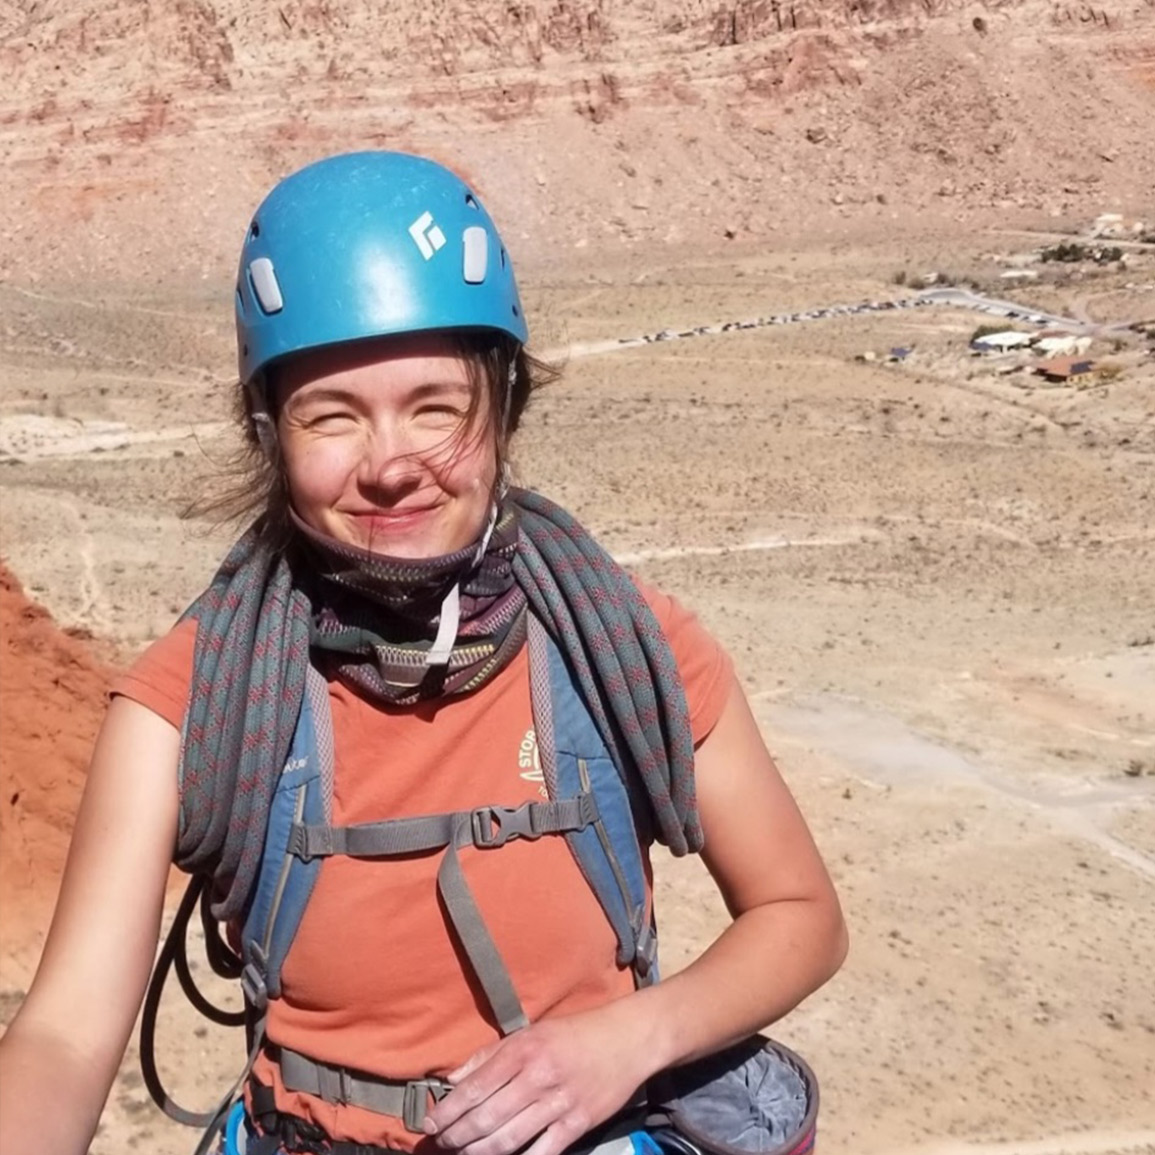 Woman named Jessica with rock climbing gear on.